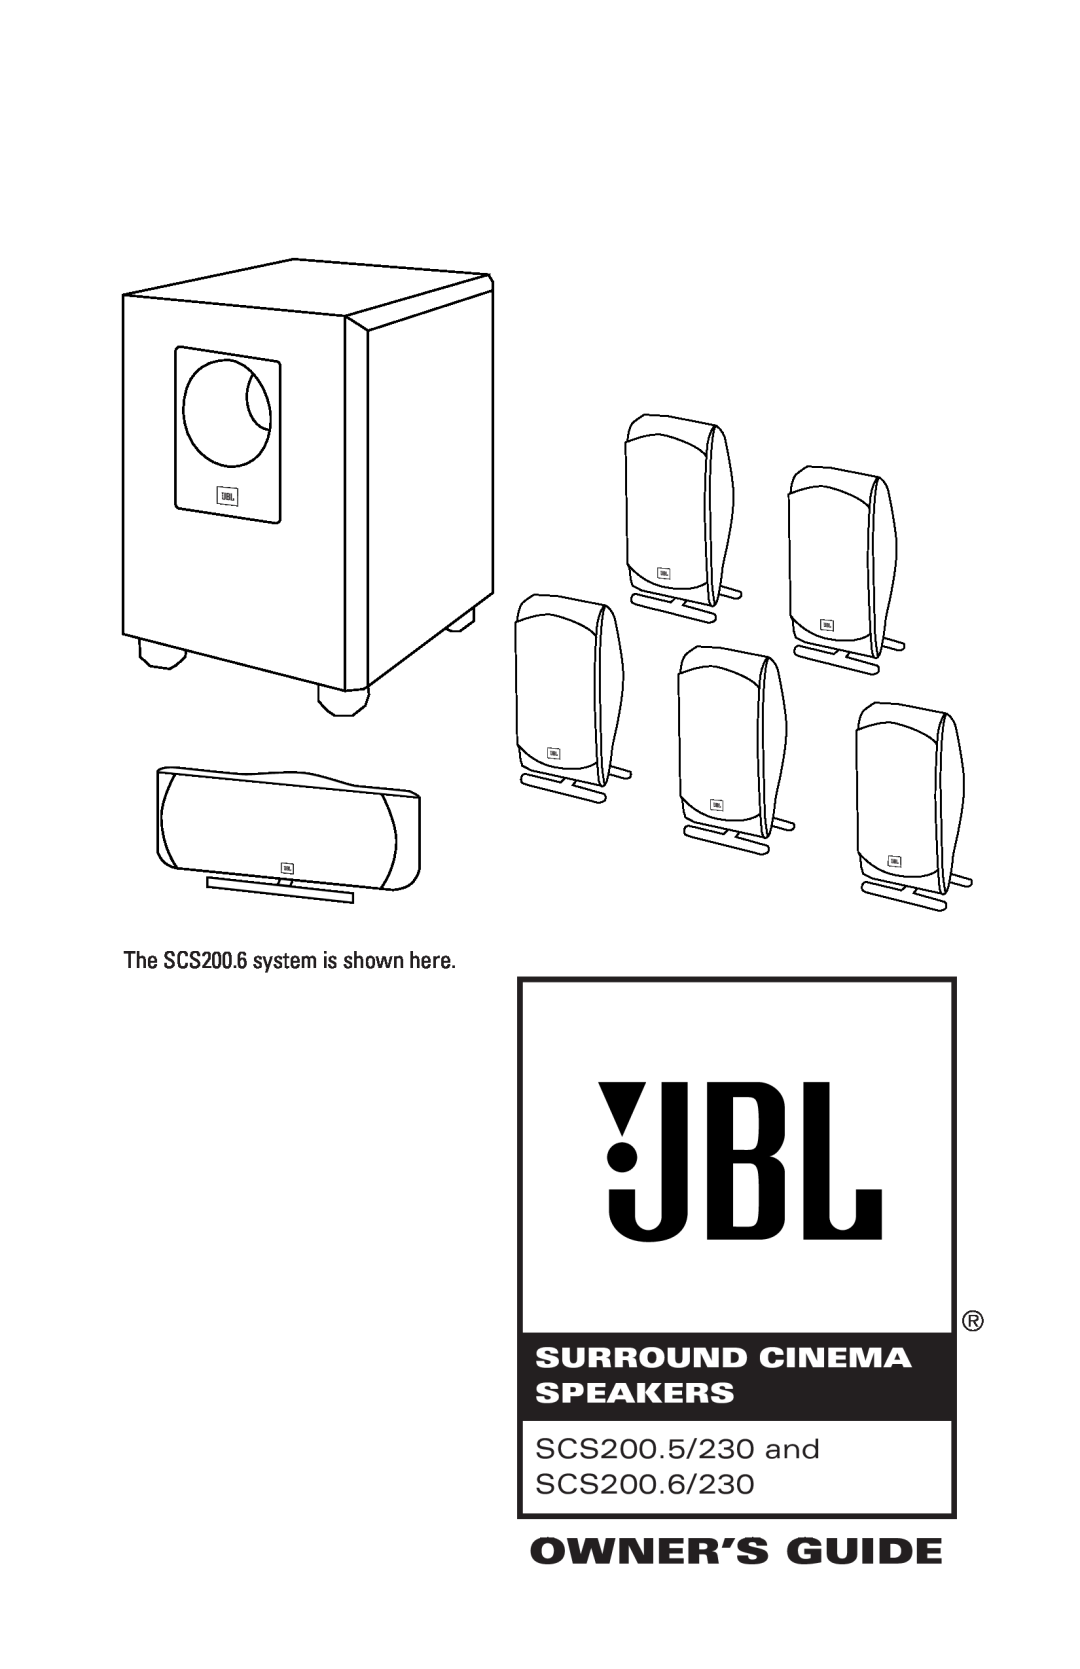 JBL manual Owner’S Guide, Surround Cinema Speakers, SCS200.5/230 and SCS200.6/230 